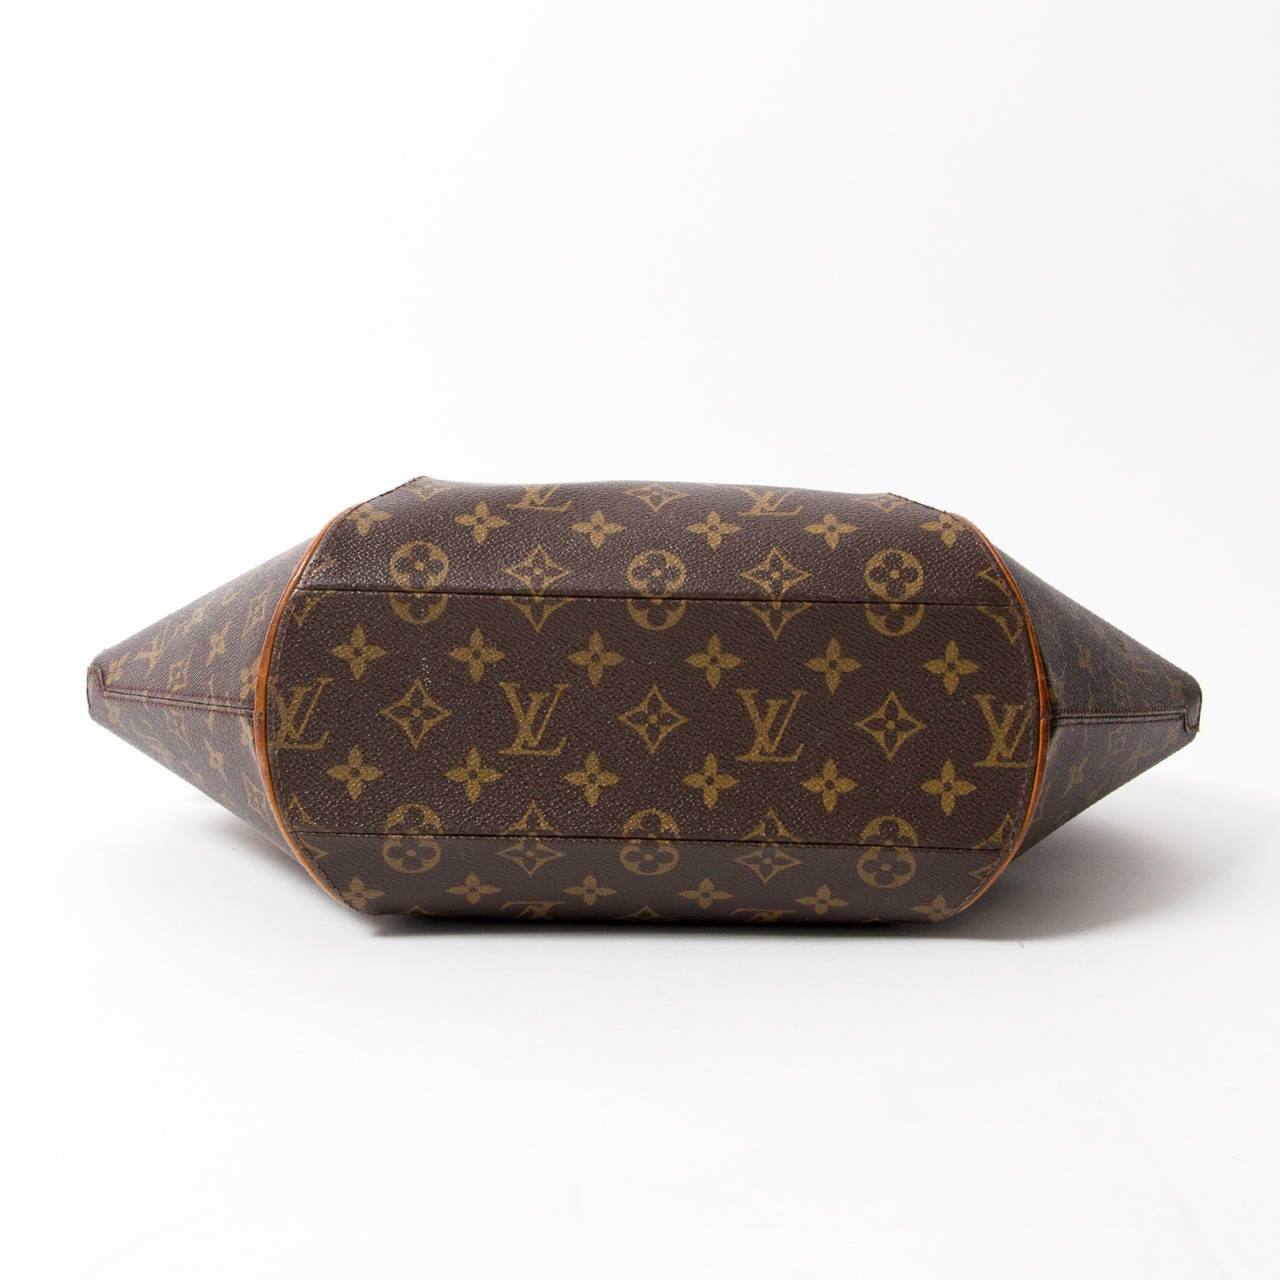 Beautiful Louis Vuitton Ellipse shoulder bag with the iconic LV monogram.

Top zip closure with lock and long shoulder straps. One pocket with zip on the front.

This bag is no longer available in Louis Vuitton stores worldwide.